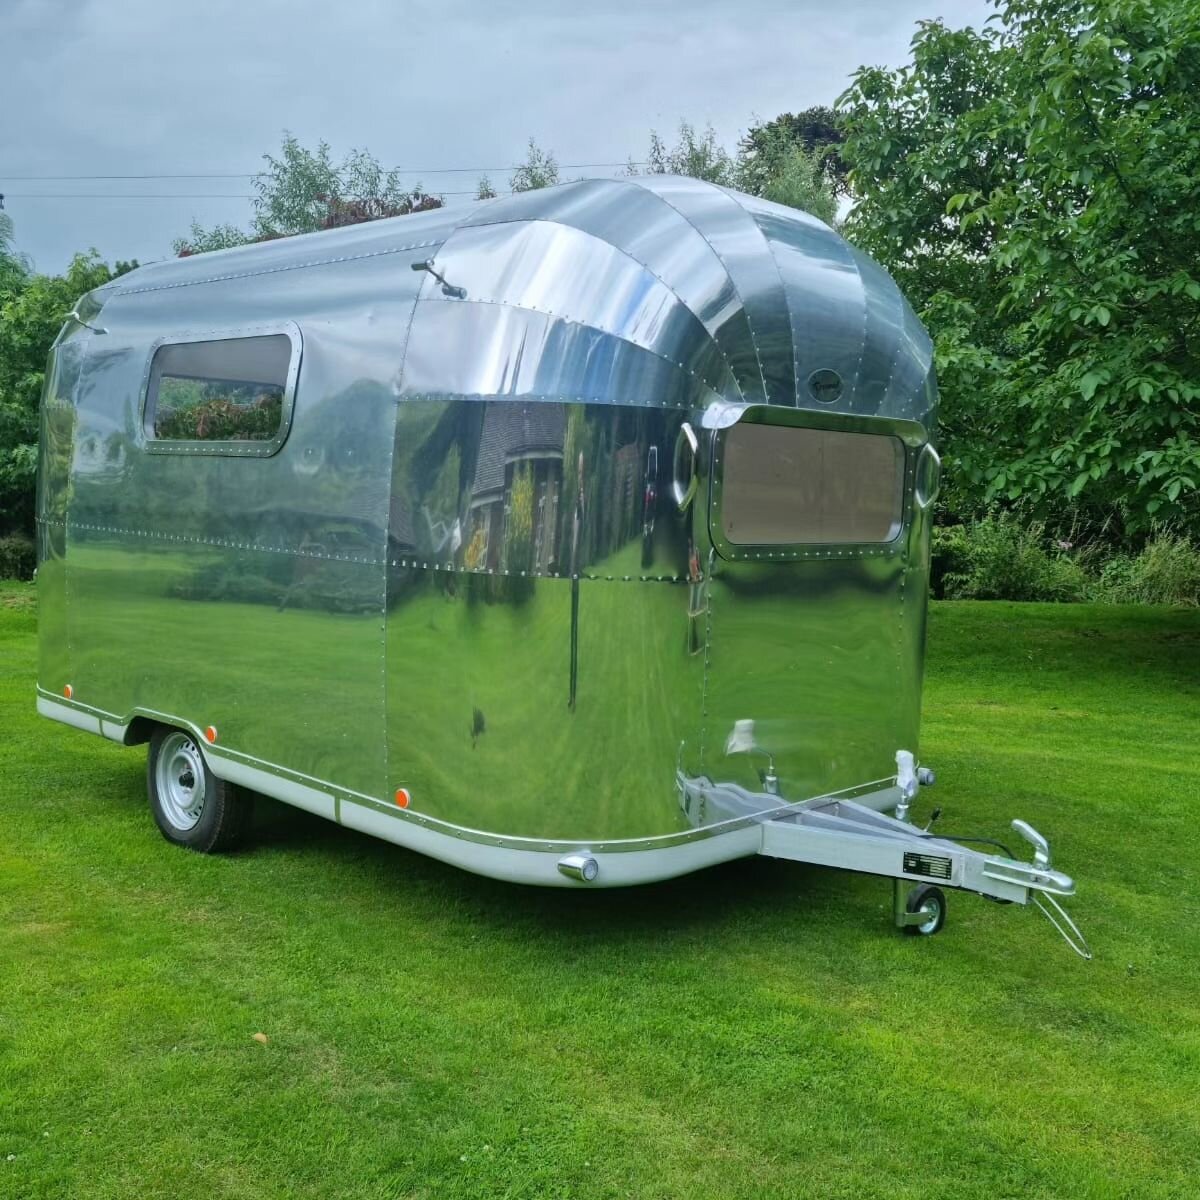 Introducing our new super light trailer! Built on our exclusive all aluminium lightweight chassis providing greater towing flexibility and economy! 🌍 For more information visit our website (link in bio) Perfect for garden bars, glamping experiences,